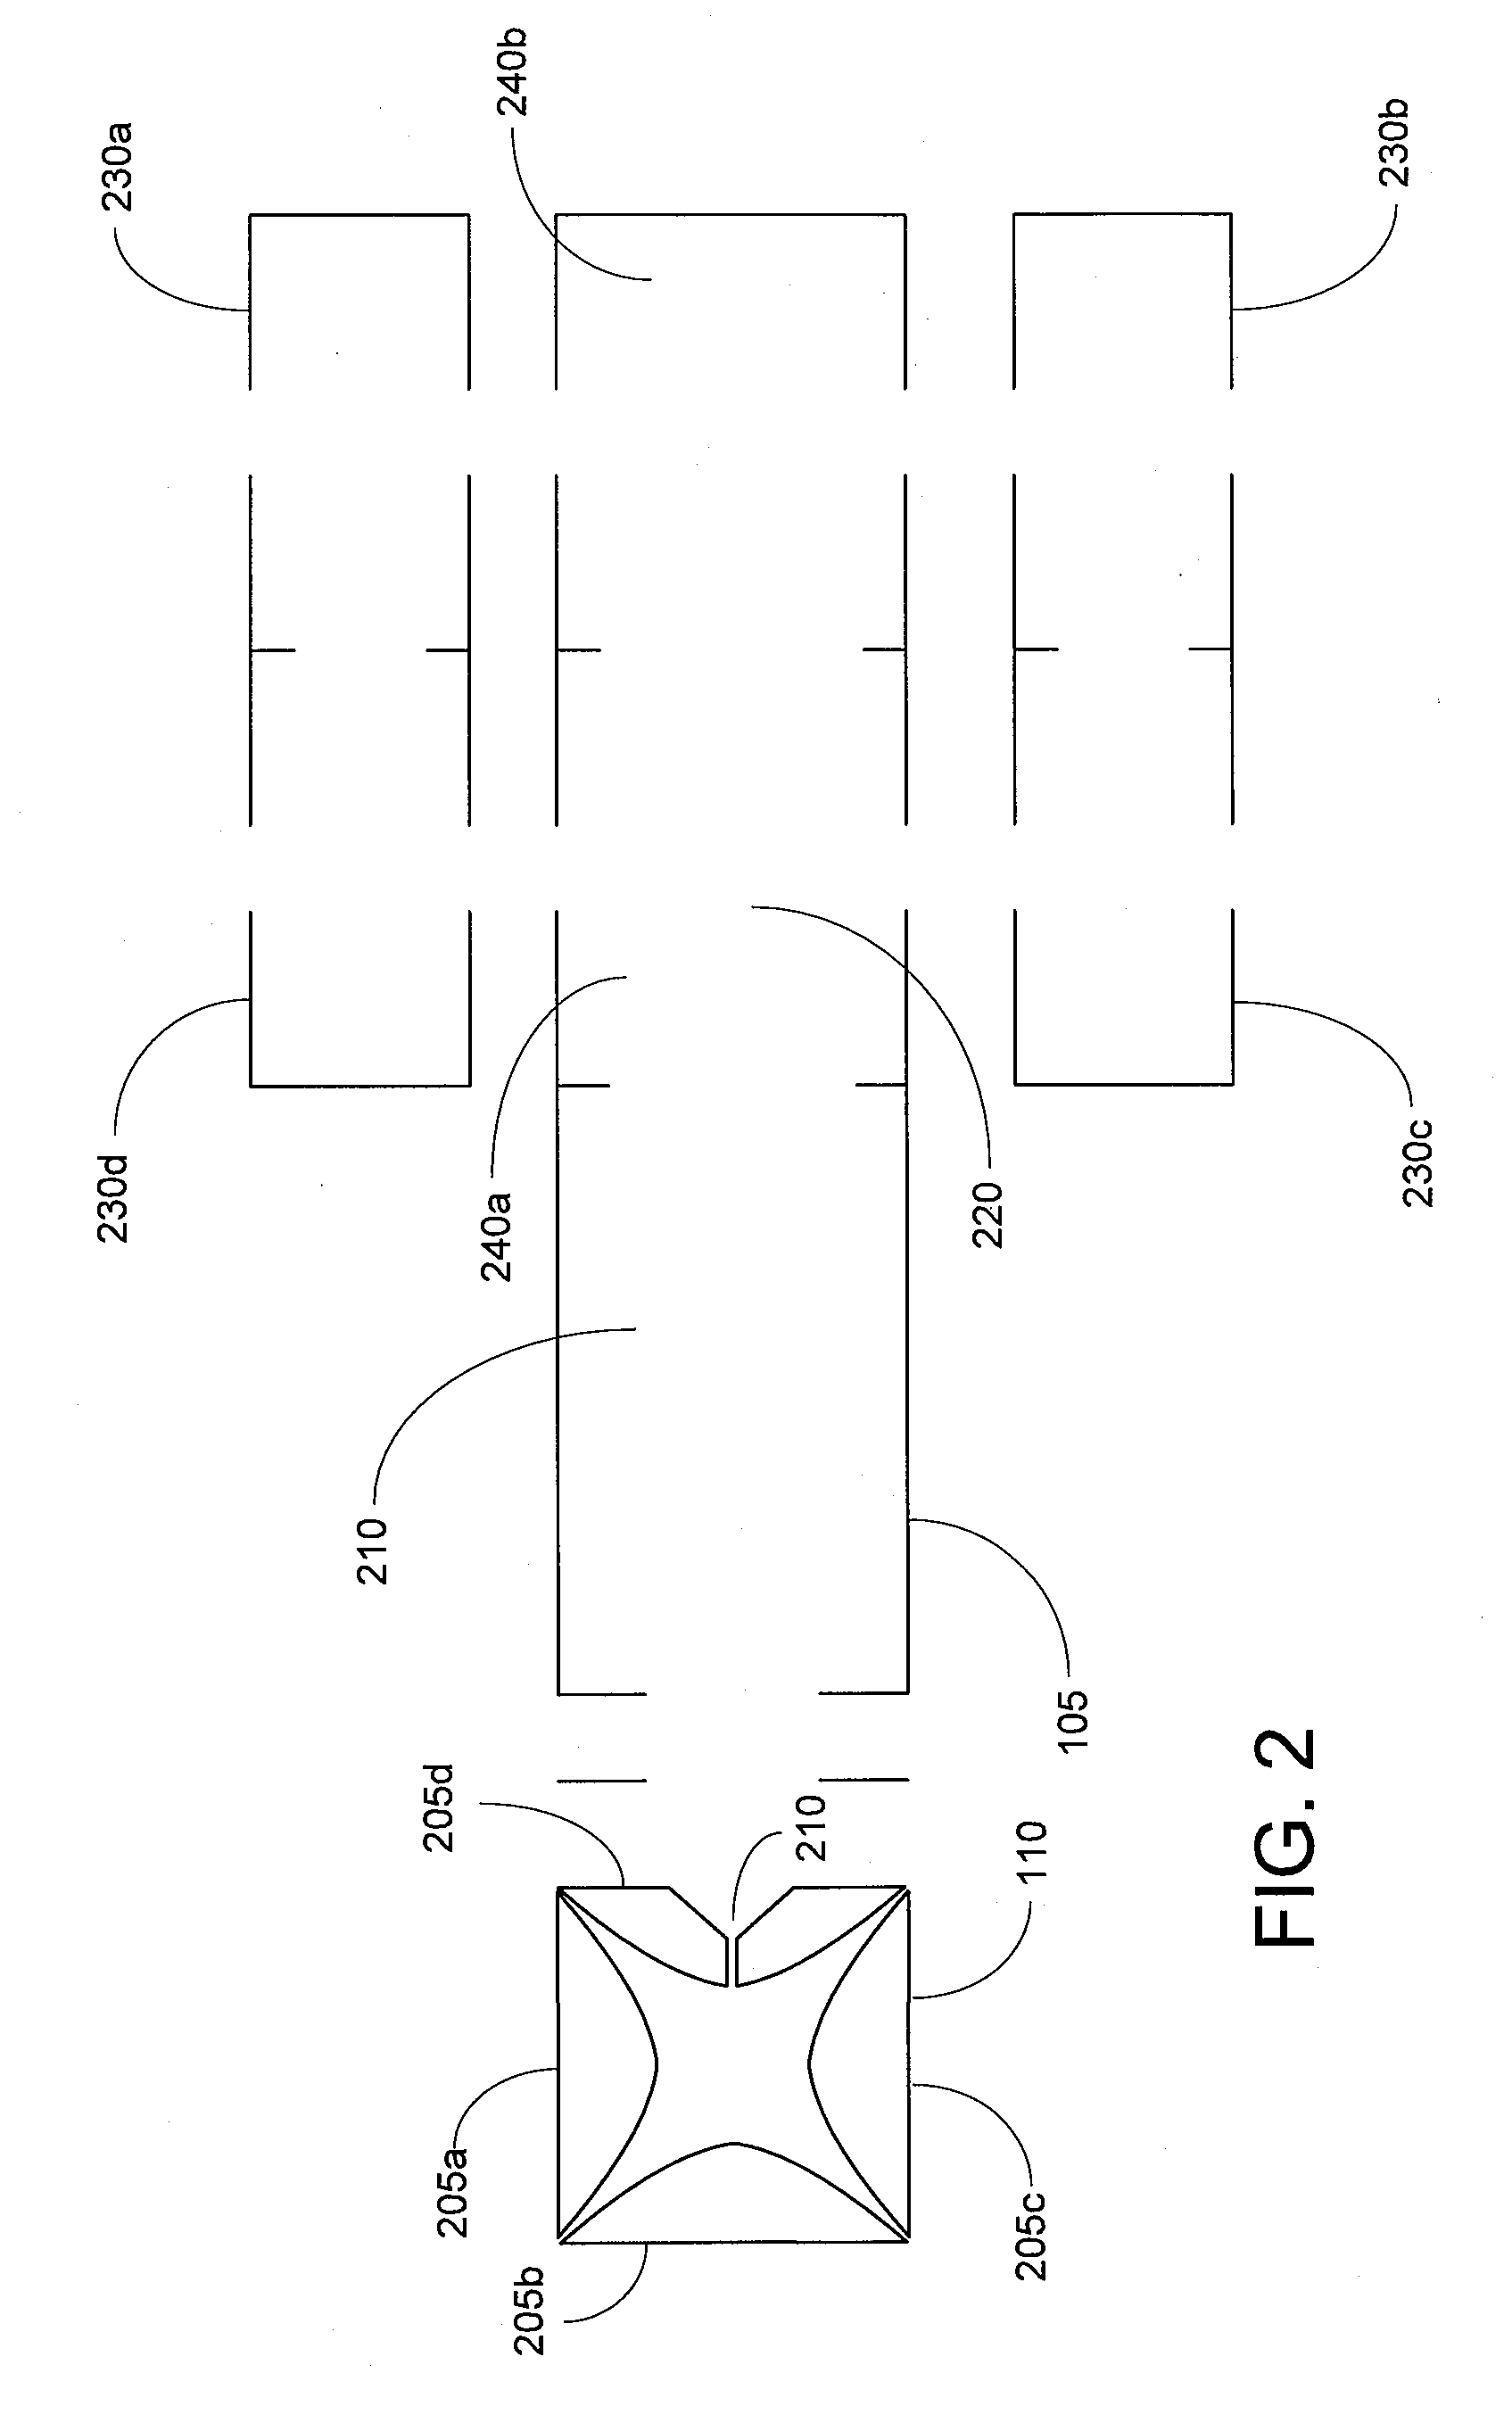 Ion Interface Device Having Multiple Confinement Cells And Methods Of Use Thereof